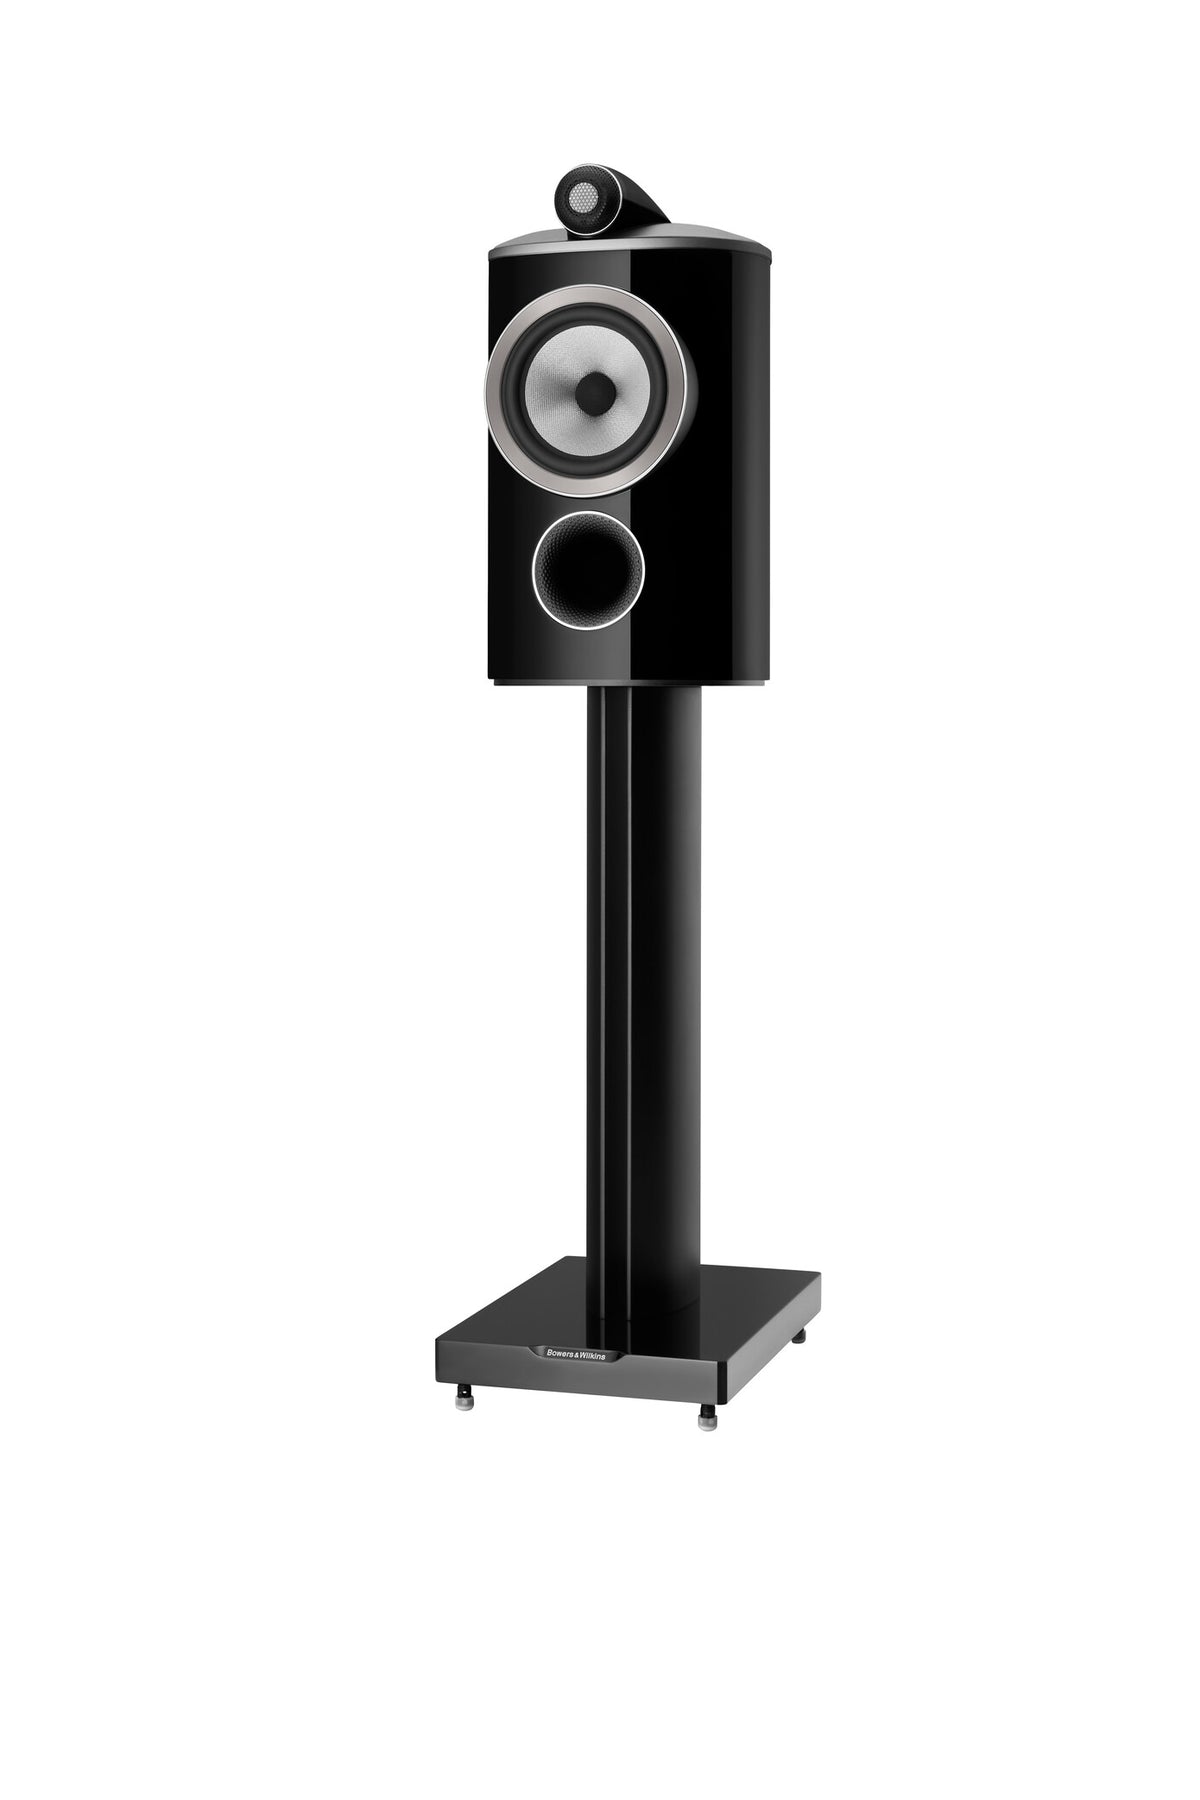 Bowers and Wilkins 805 D4 - Suncoast Audio